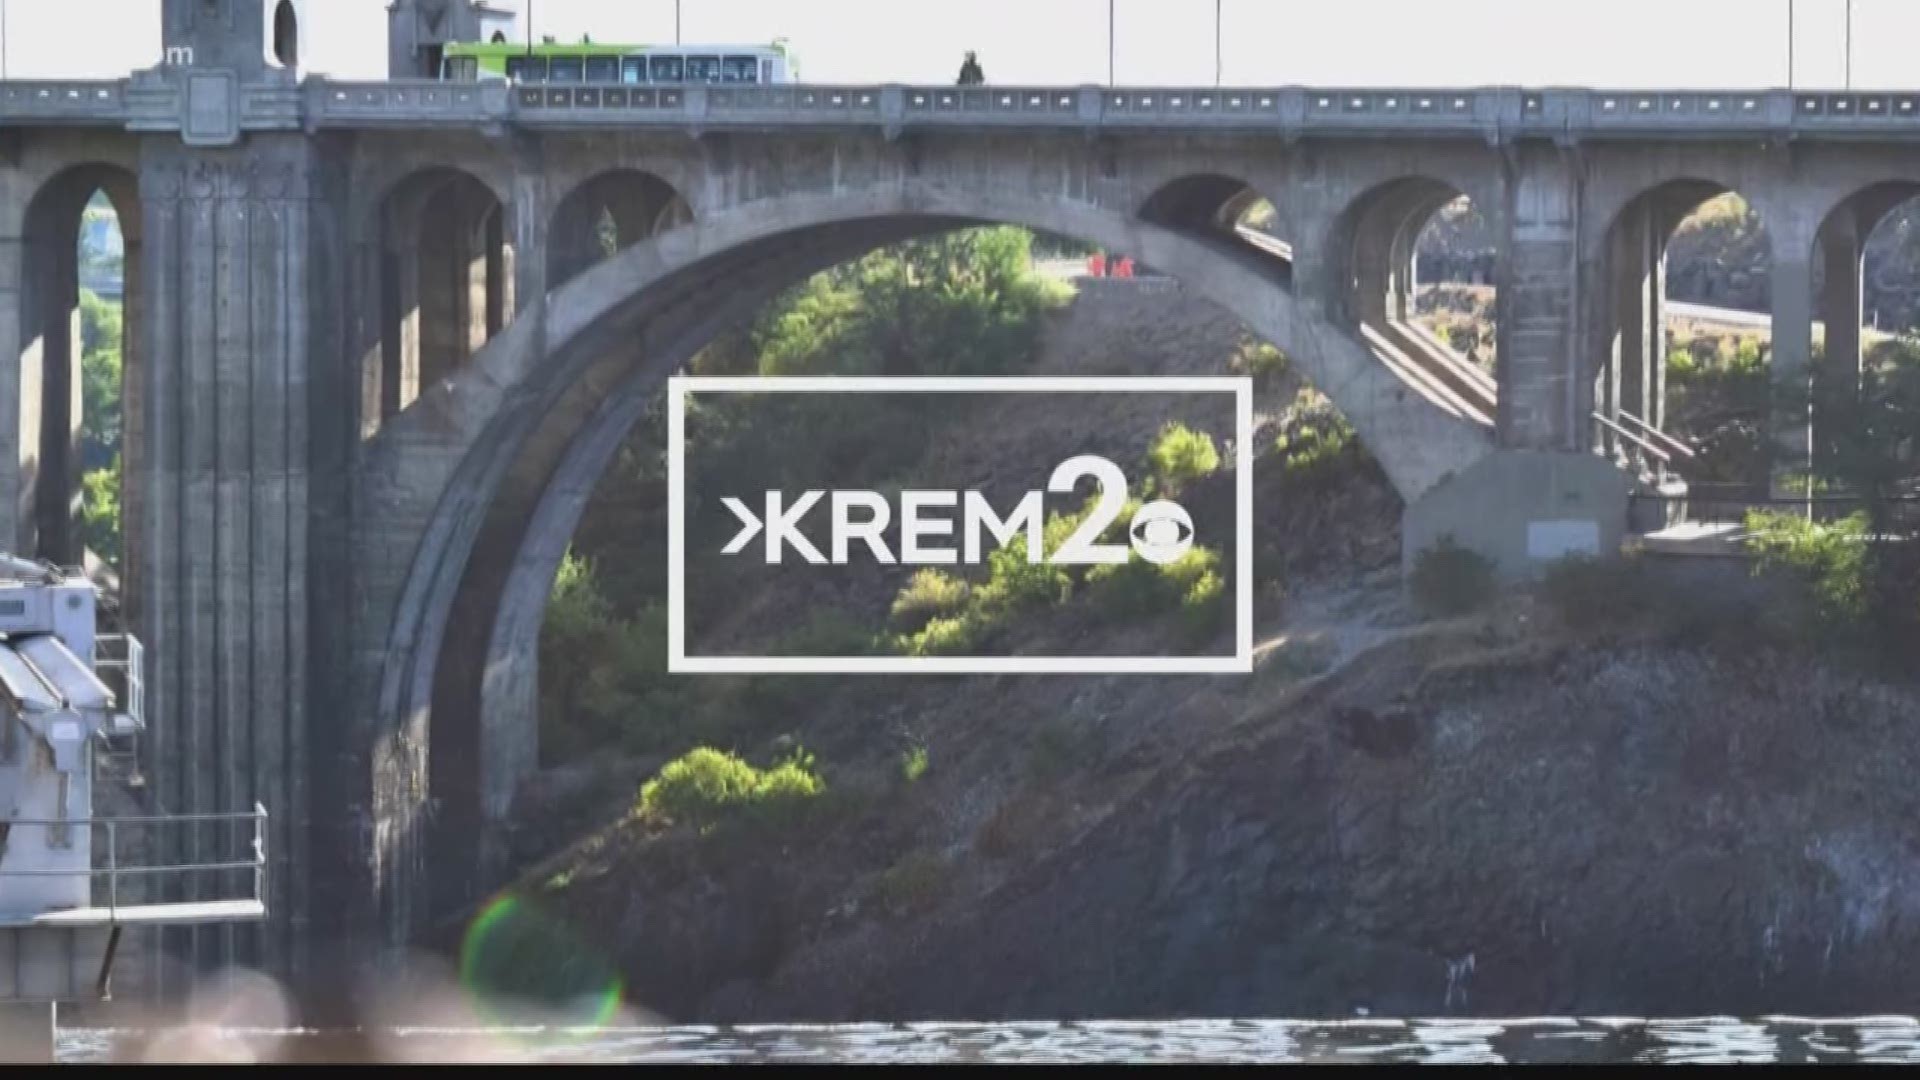 KREM 2 News at 5 top stories for Spokane and North Idaho on Memorial Day 2020